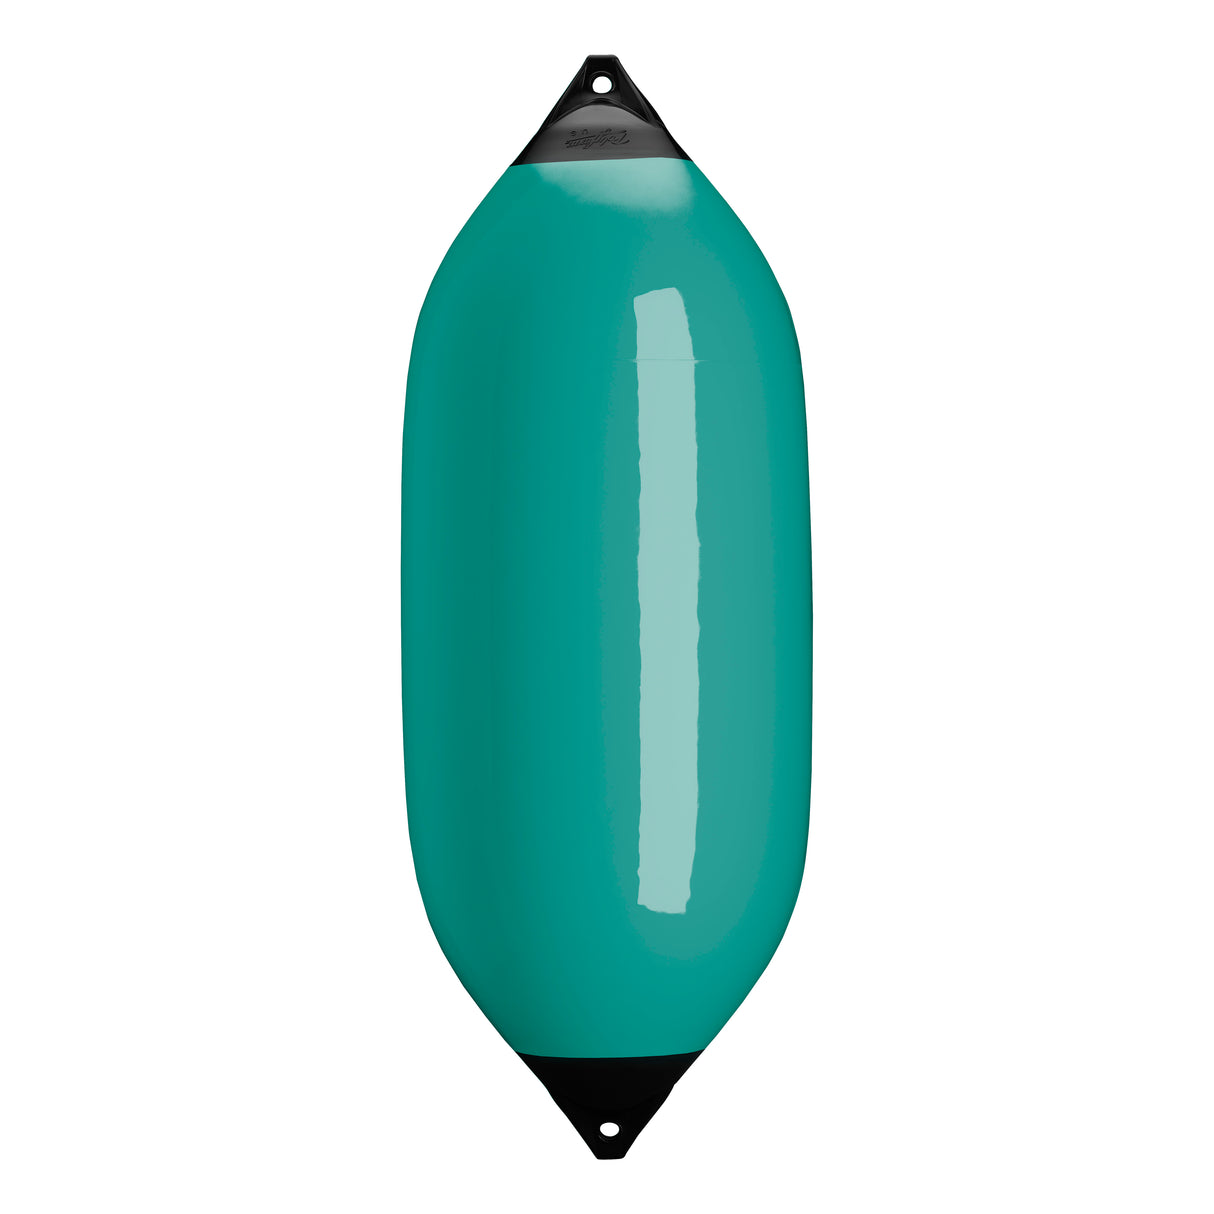 Teal boat fender with Navy-Top, Polyform F-13